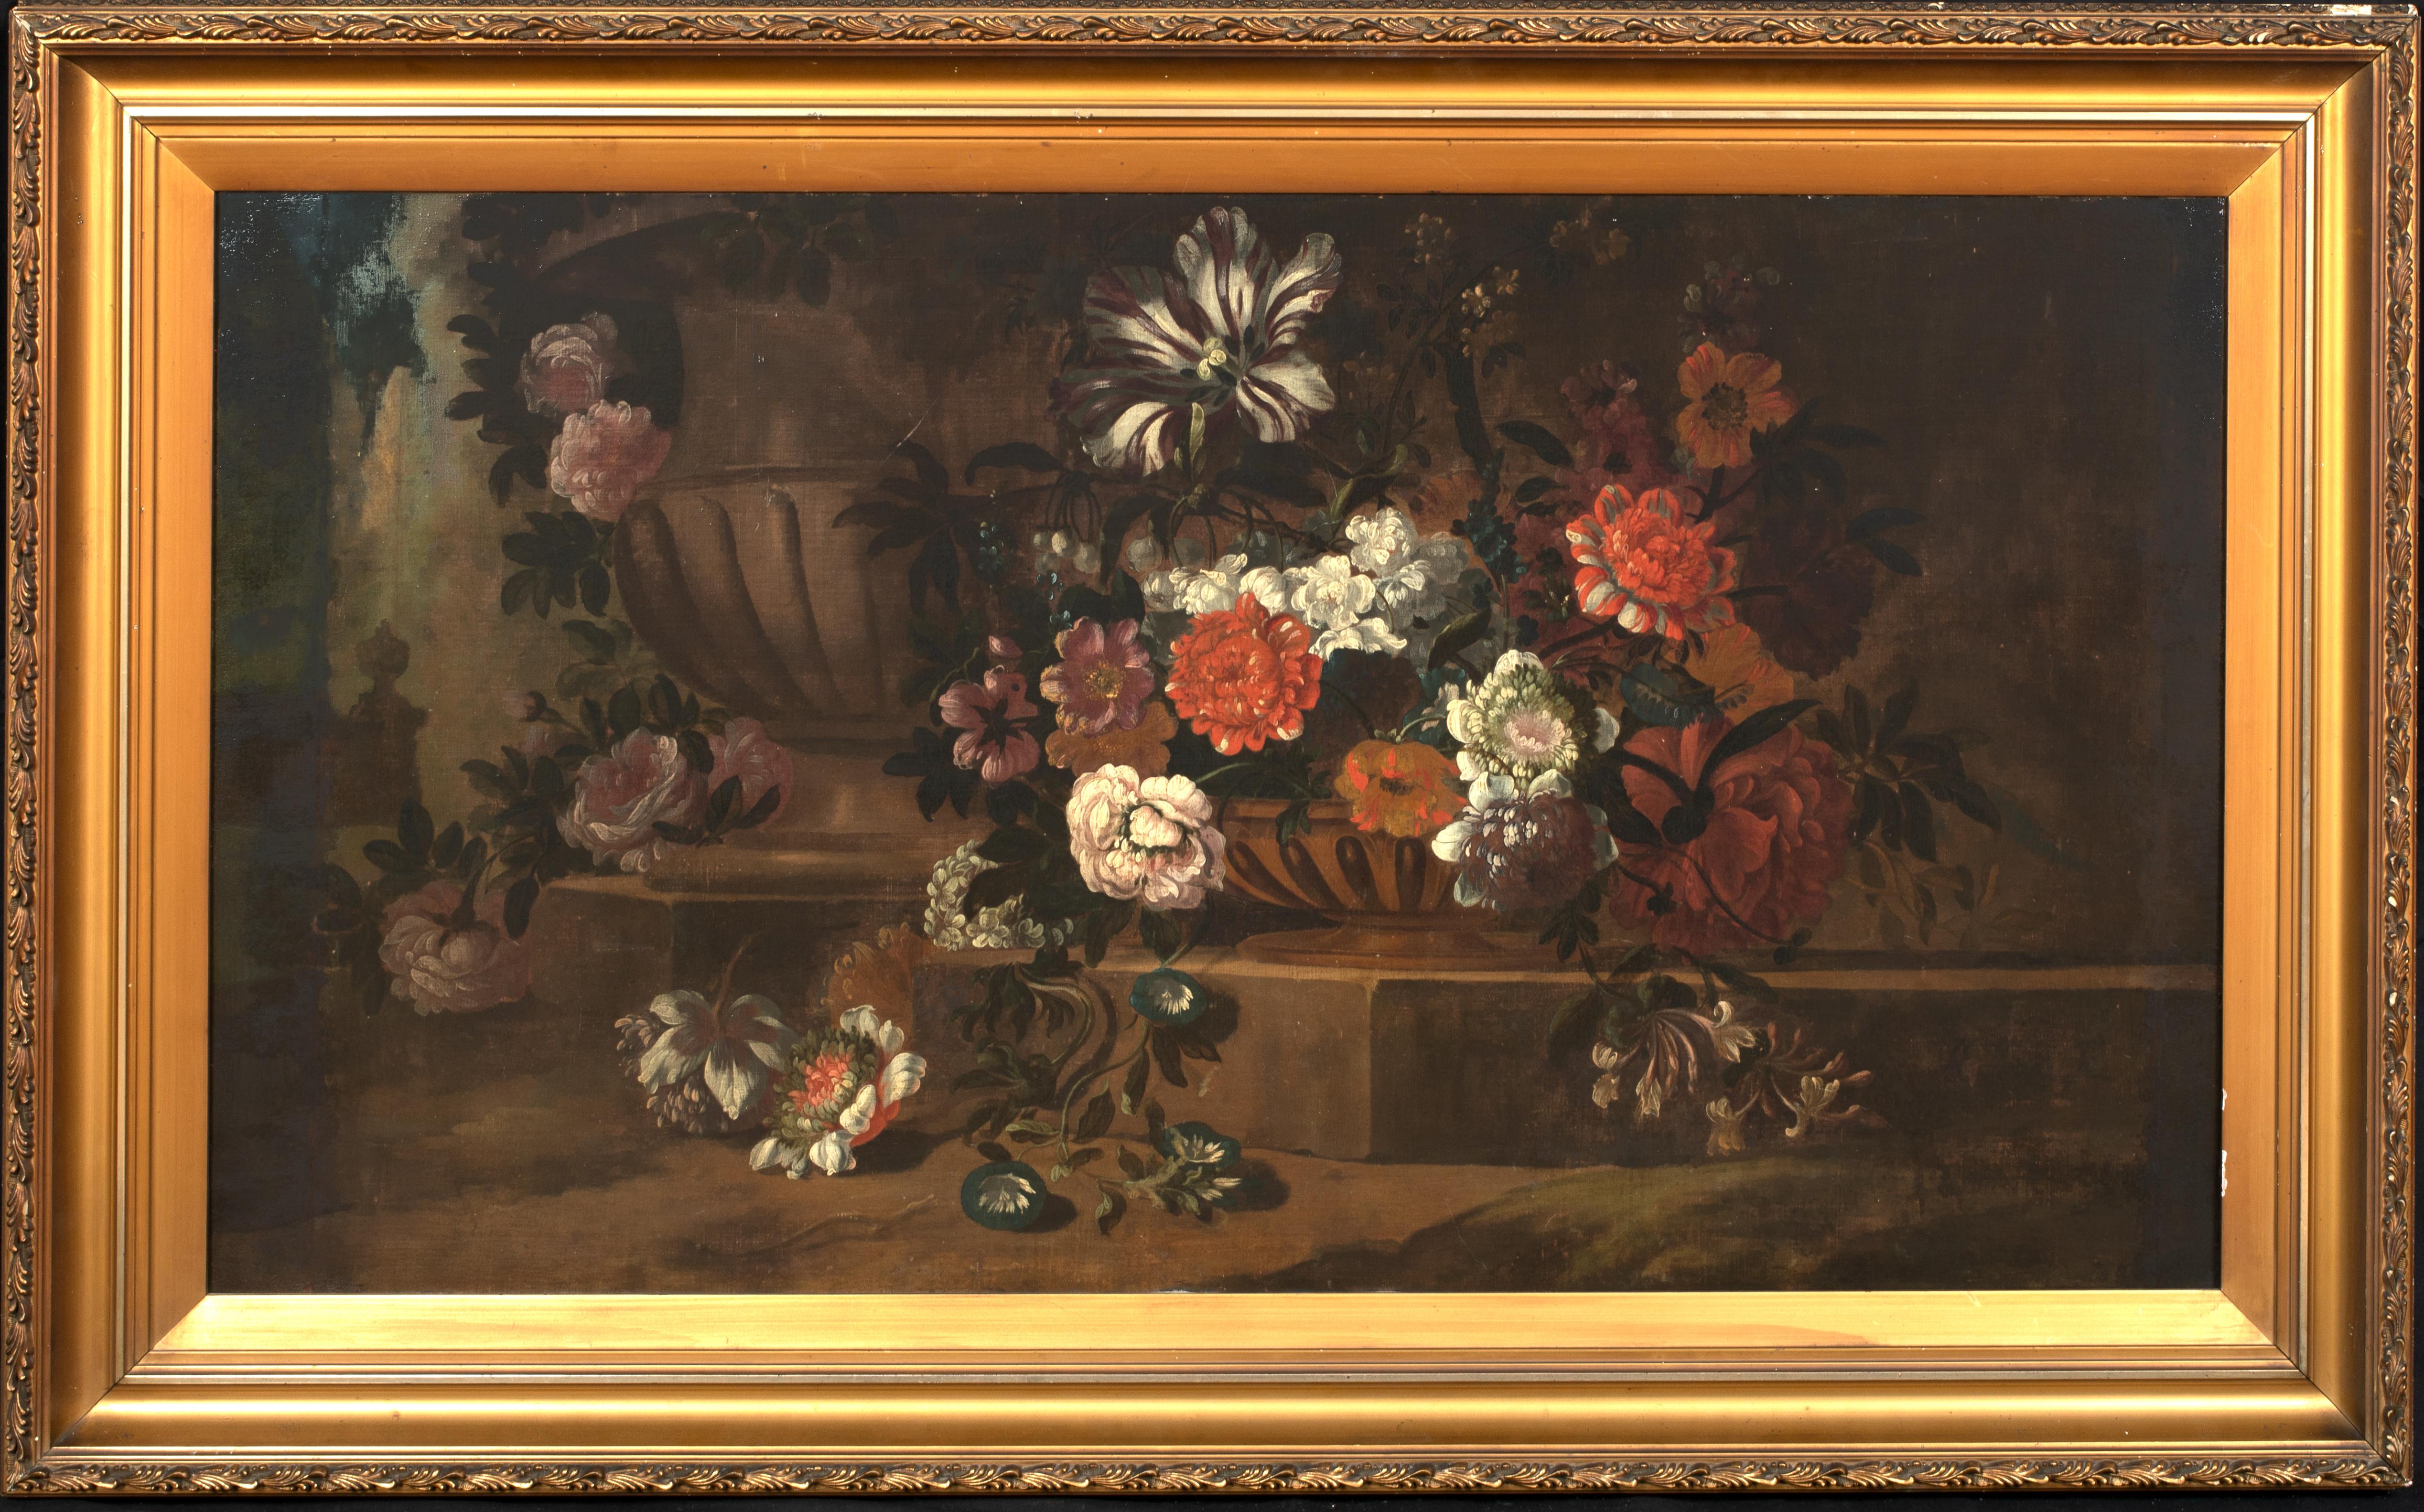 Unknown Still-Life Painting - Still life Of Flowers In A Classical Urn, 18th Century 